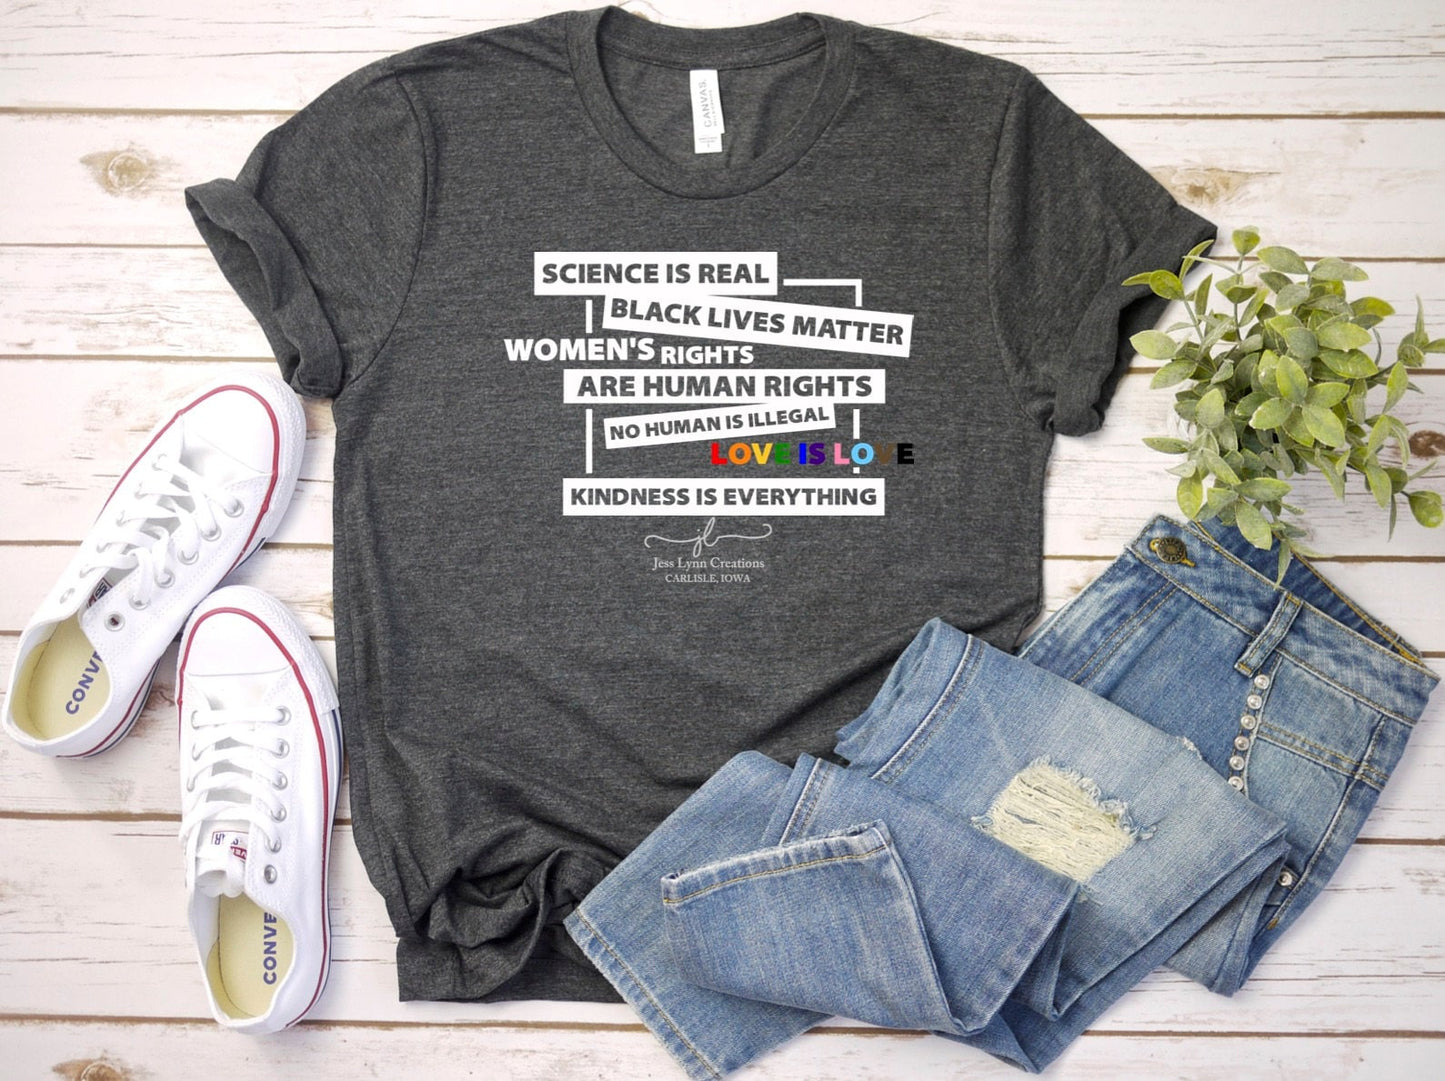 Science is Real, Black Lives Matter, Women's Rights Are Human Rights, Love is Love, Kindness is Everything Short Sleeve Shirt